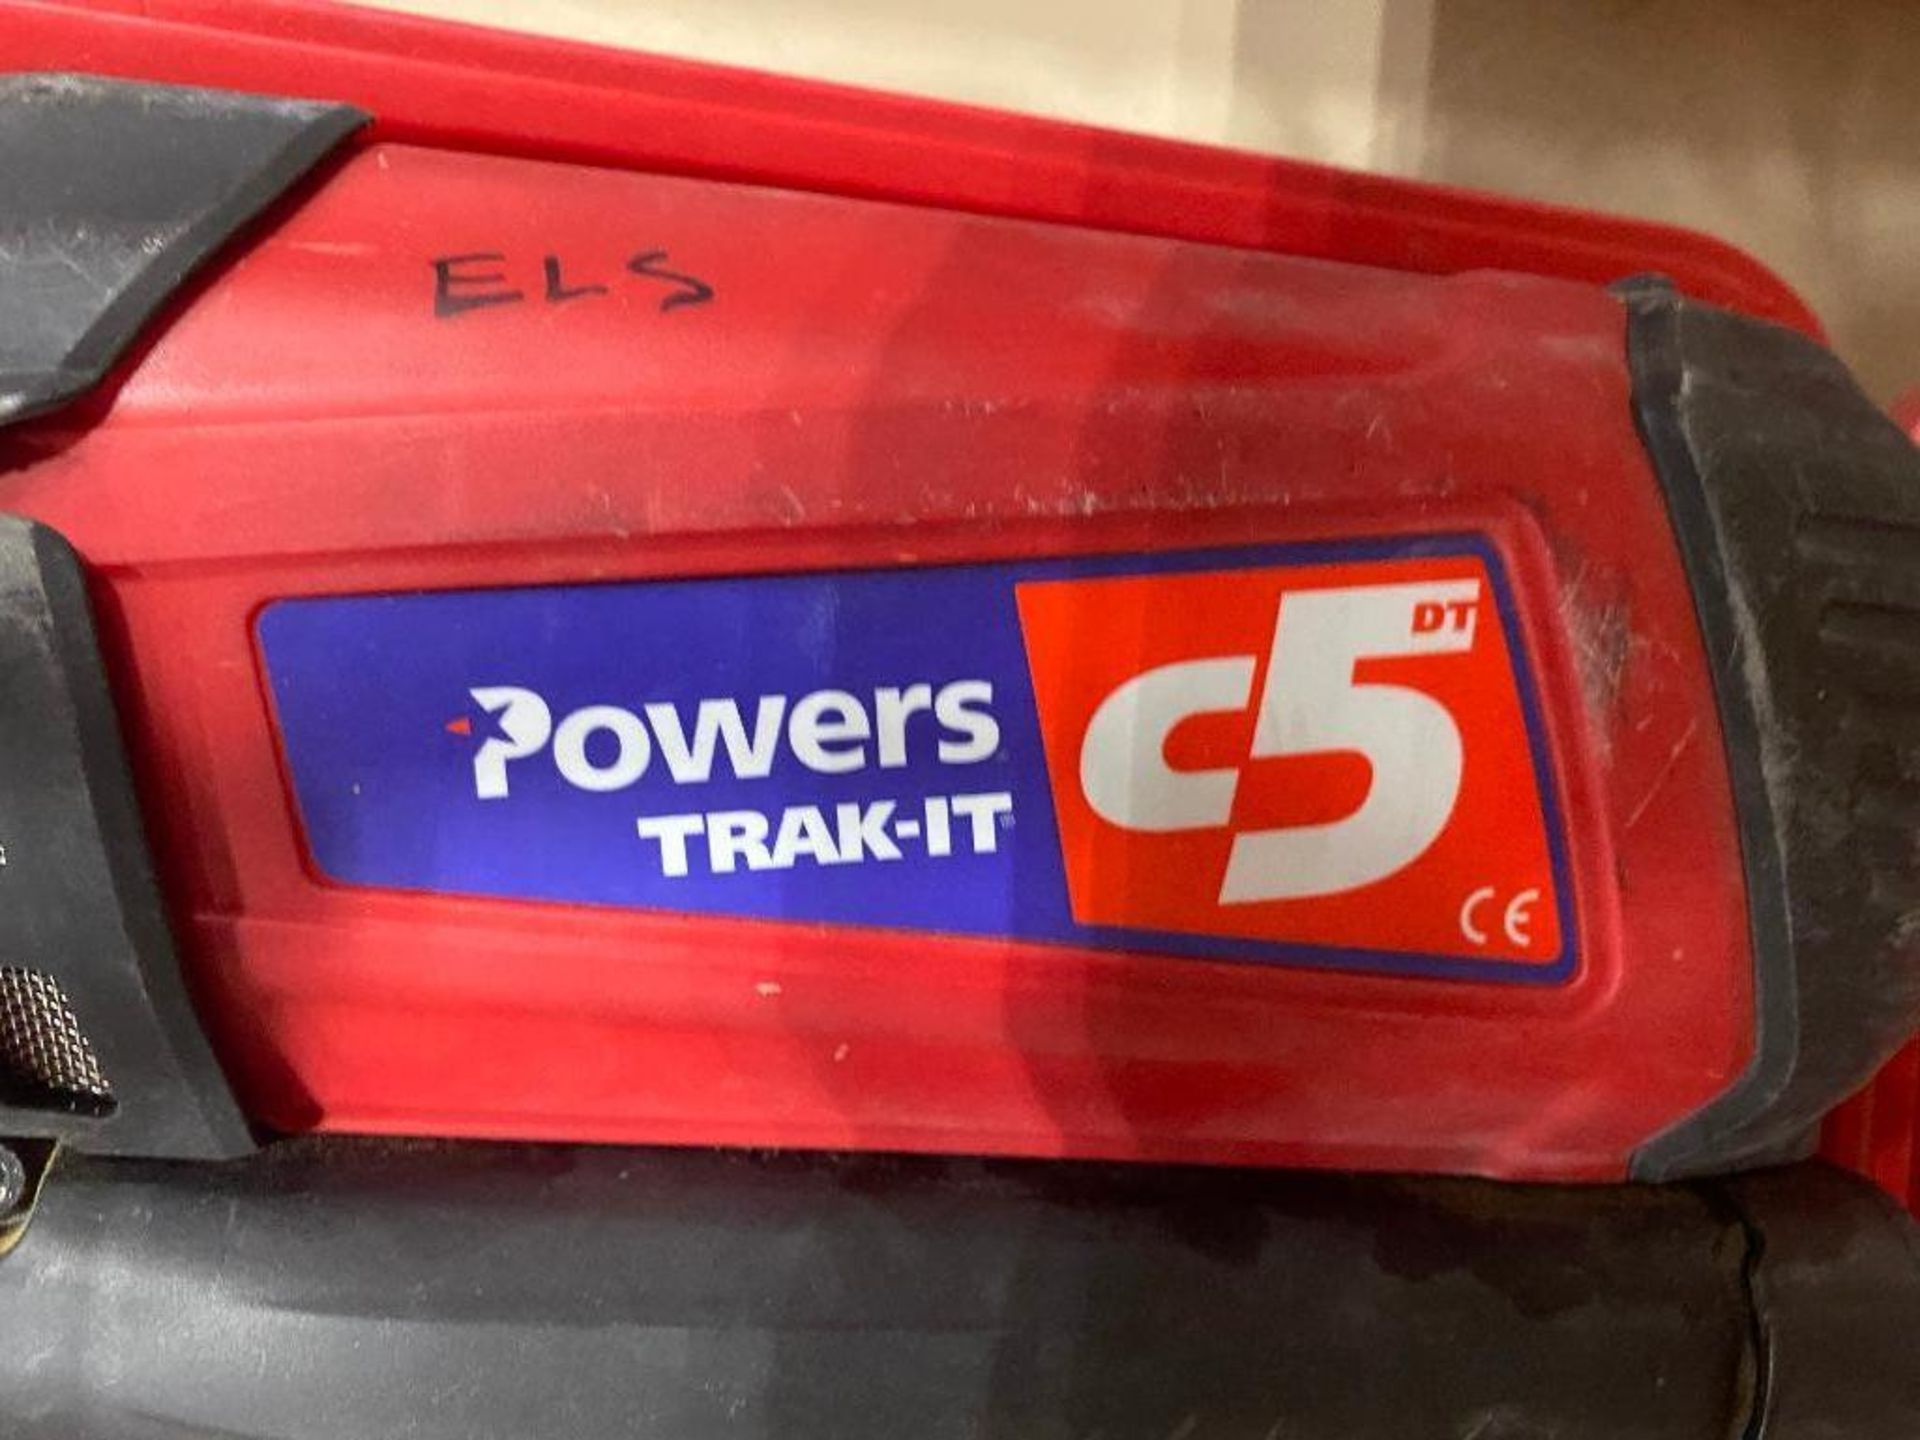 Powers Trak-It C5 DT Cordless Fastener w/ Battery, Charger, etc. - Image 3 of 3